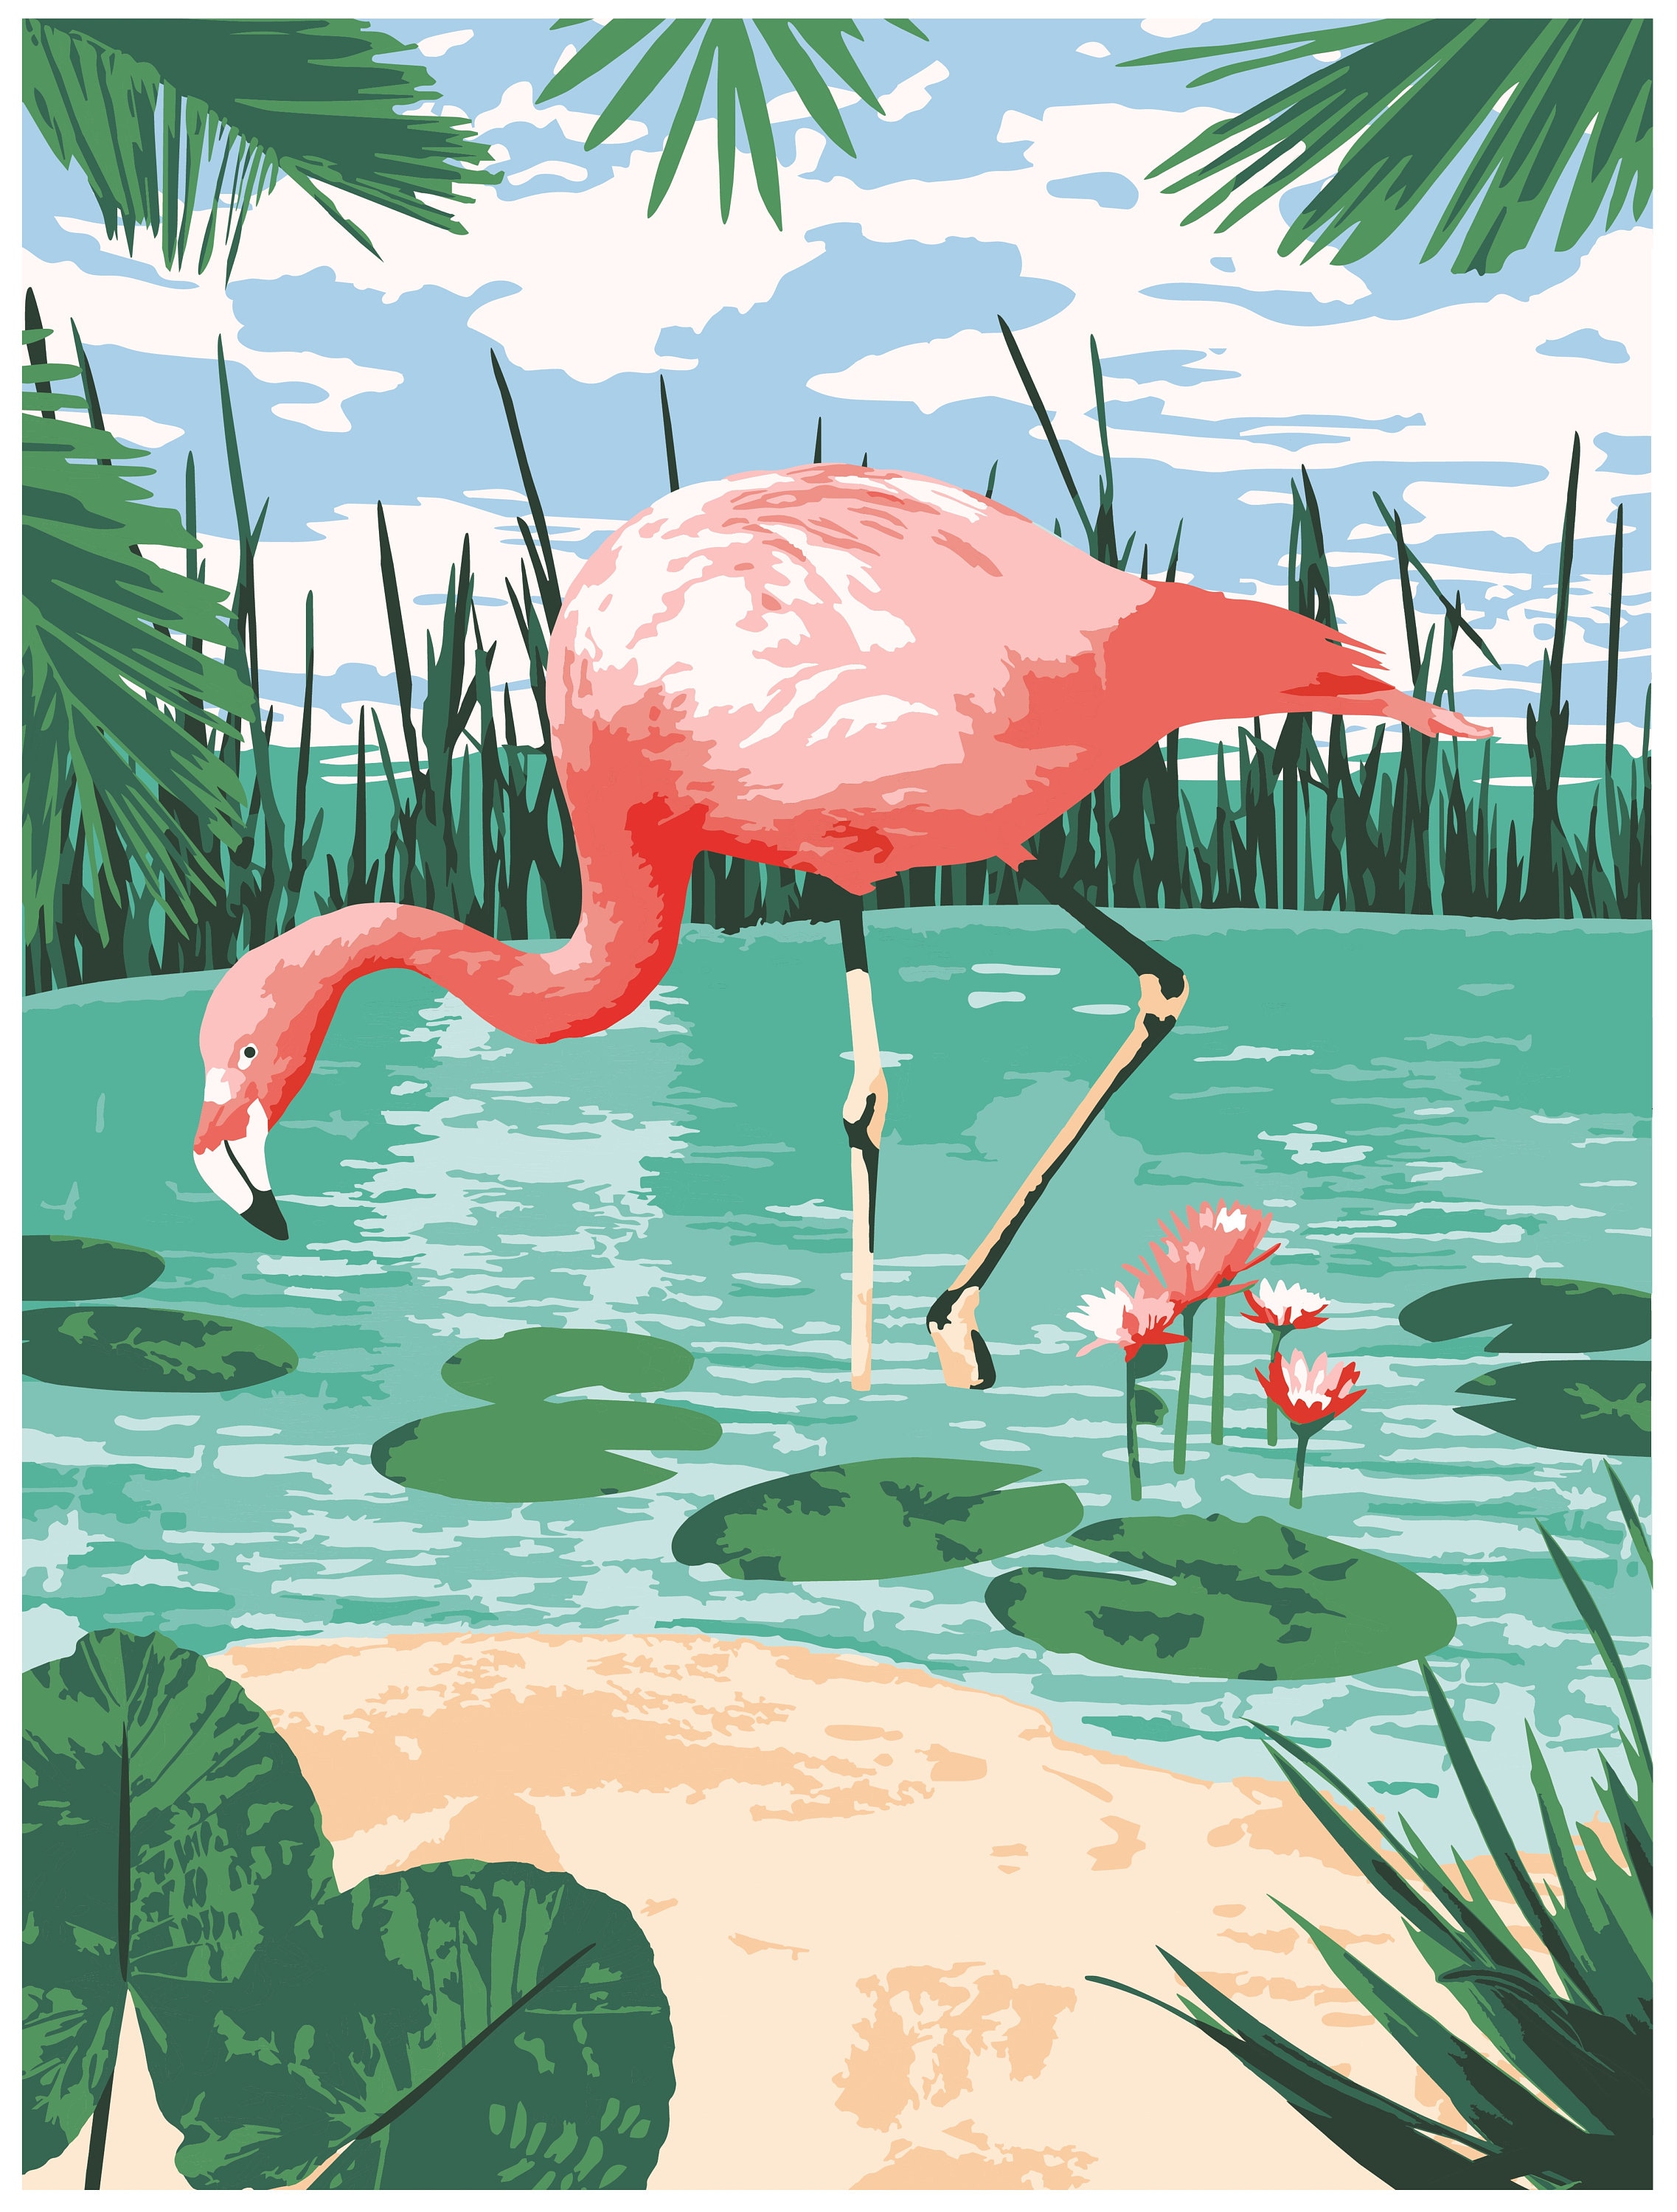 Vintage Paint by Number** Flamingo **Ready to Hang Reproduction Print